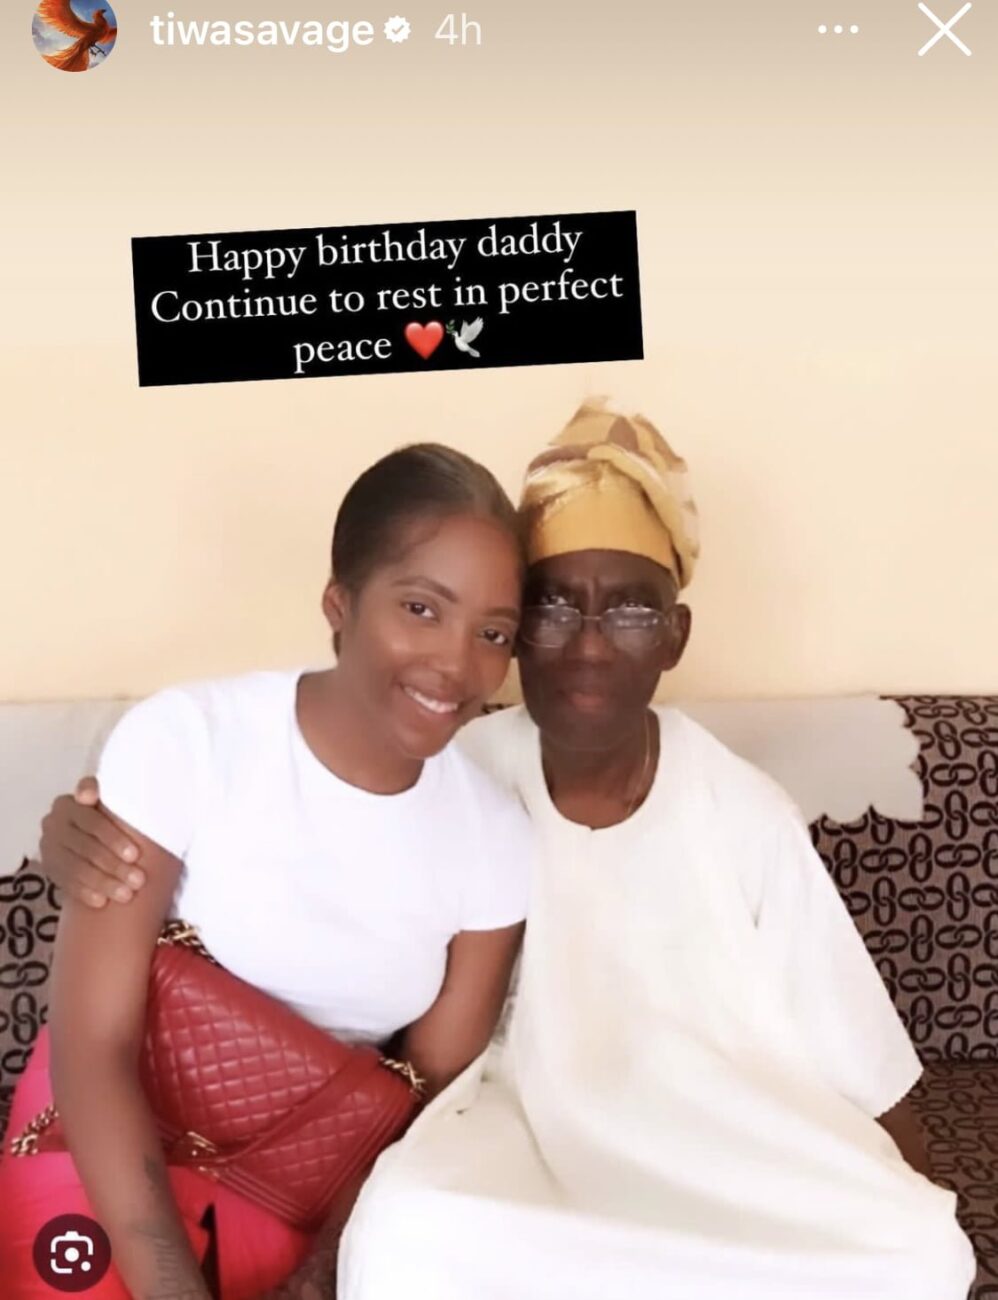 Tiwa Savage’s post humous birthday message for her dad.